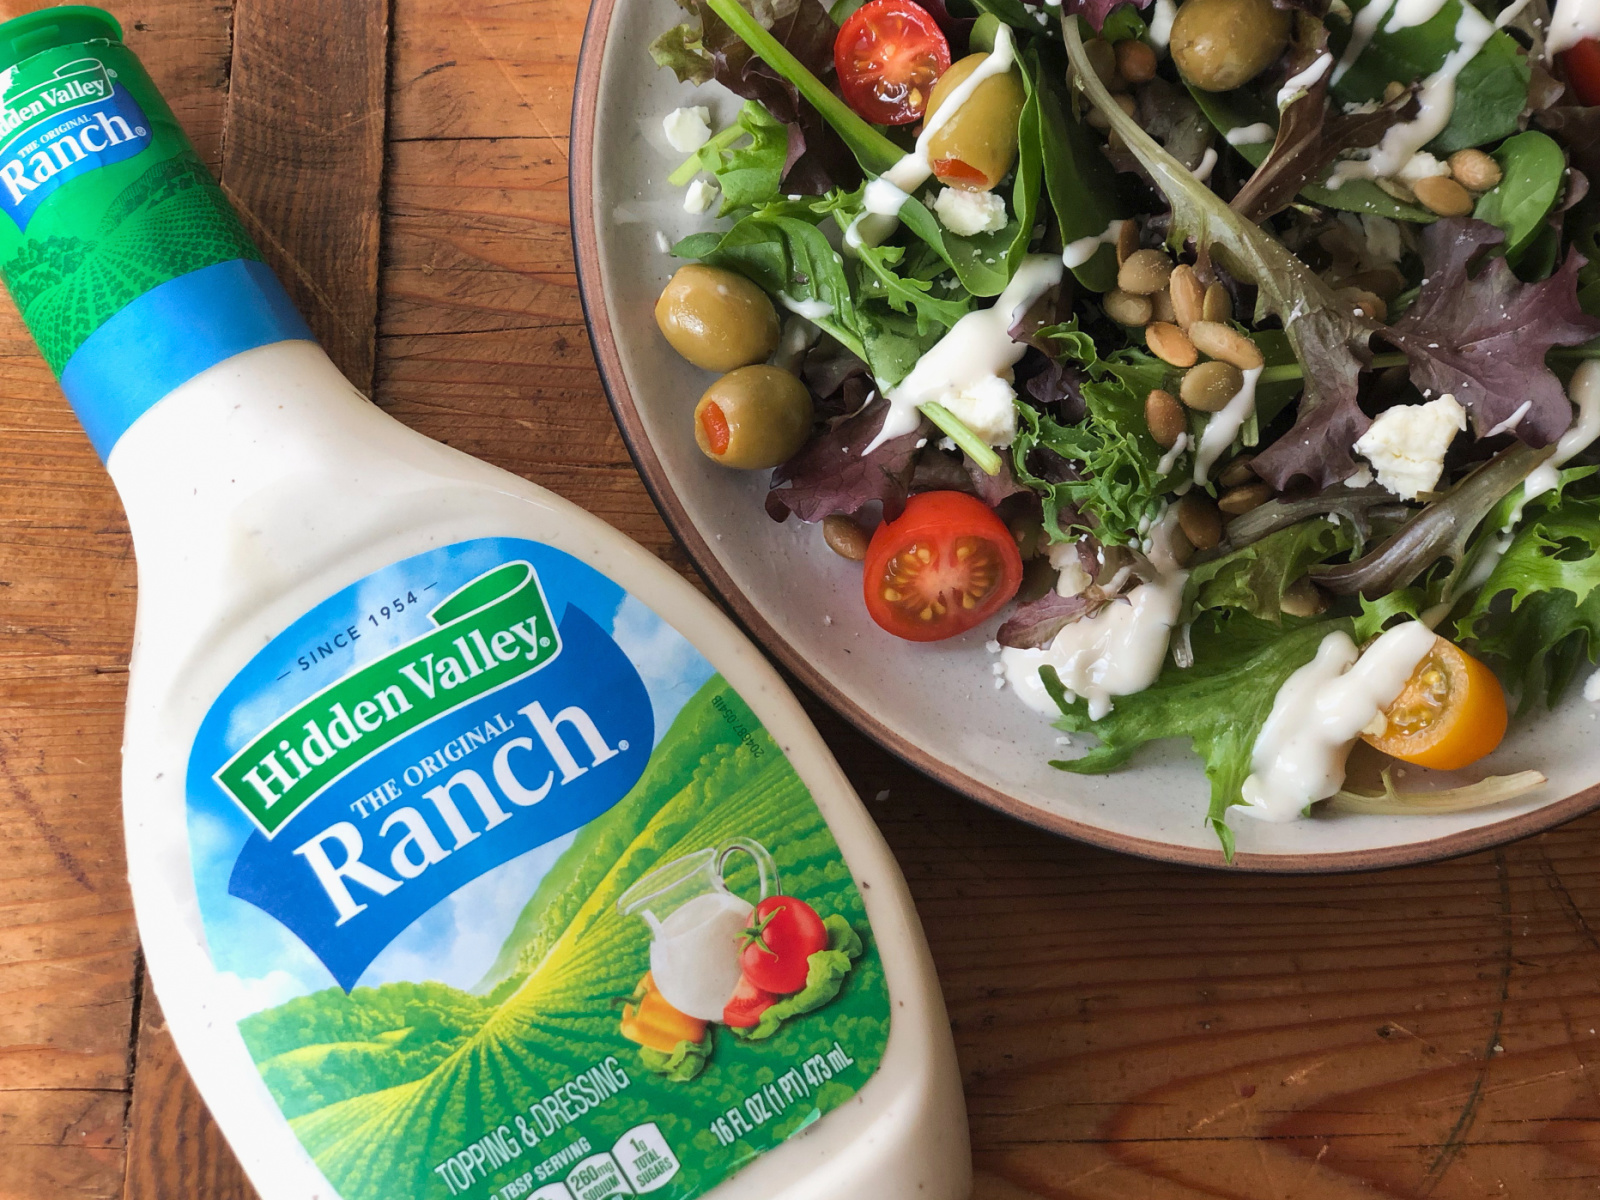 Hidden Valley Ranch Dressing As Low As 89¢ At Publix